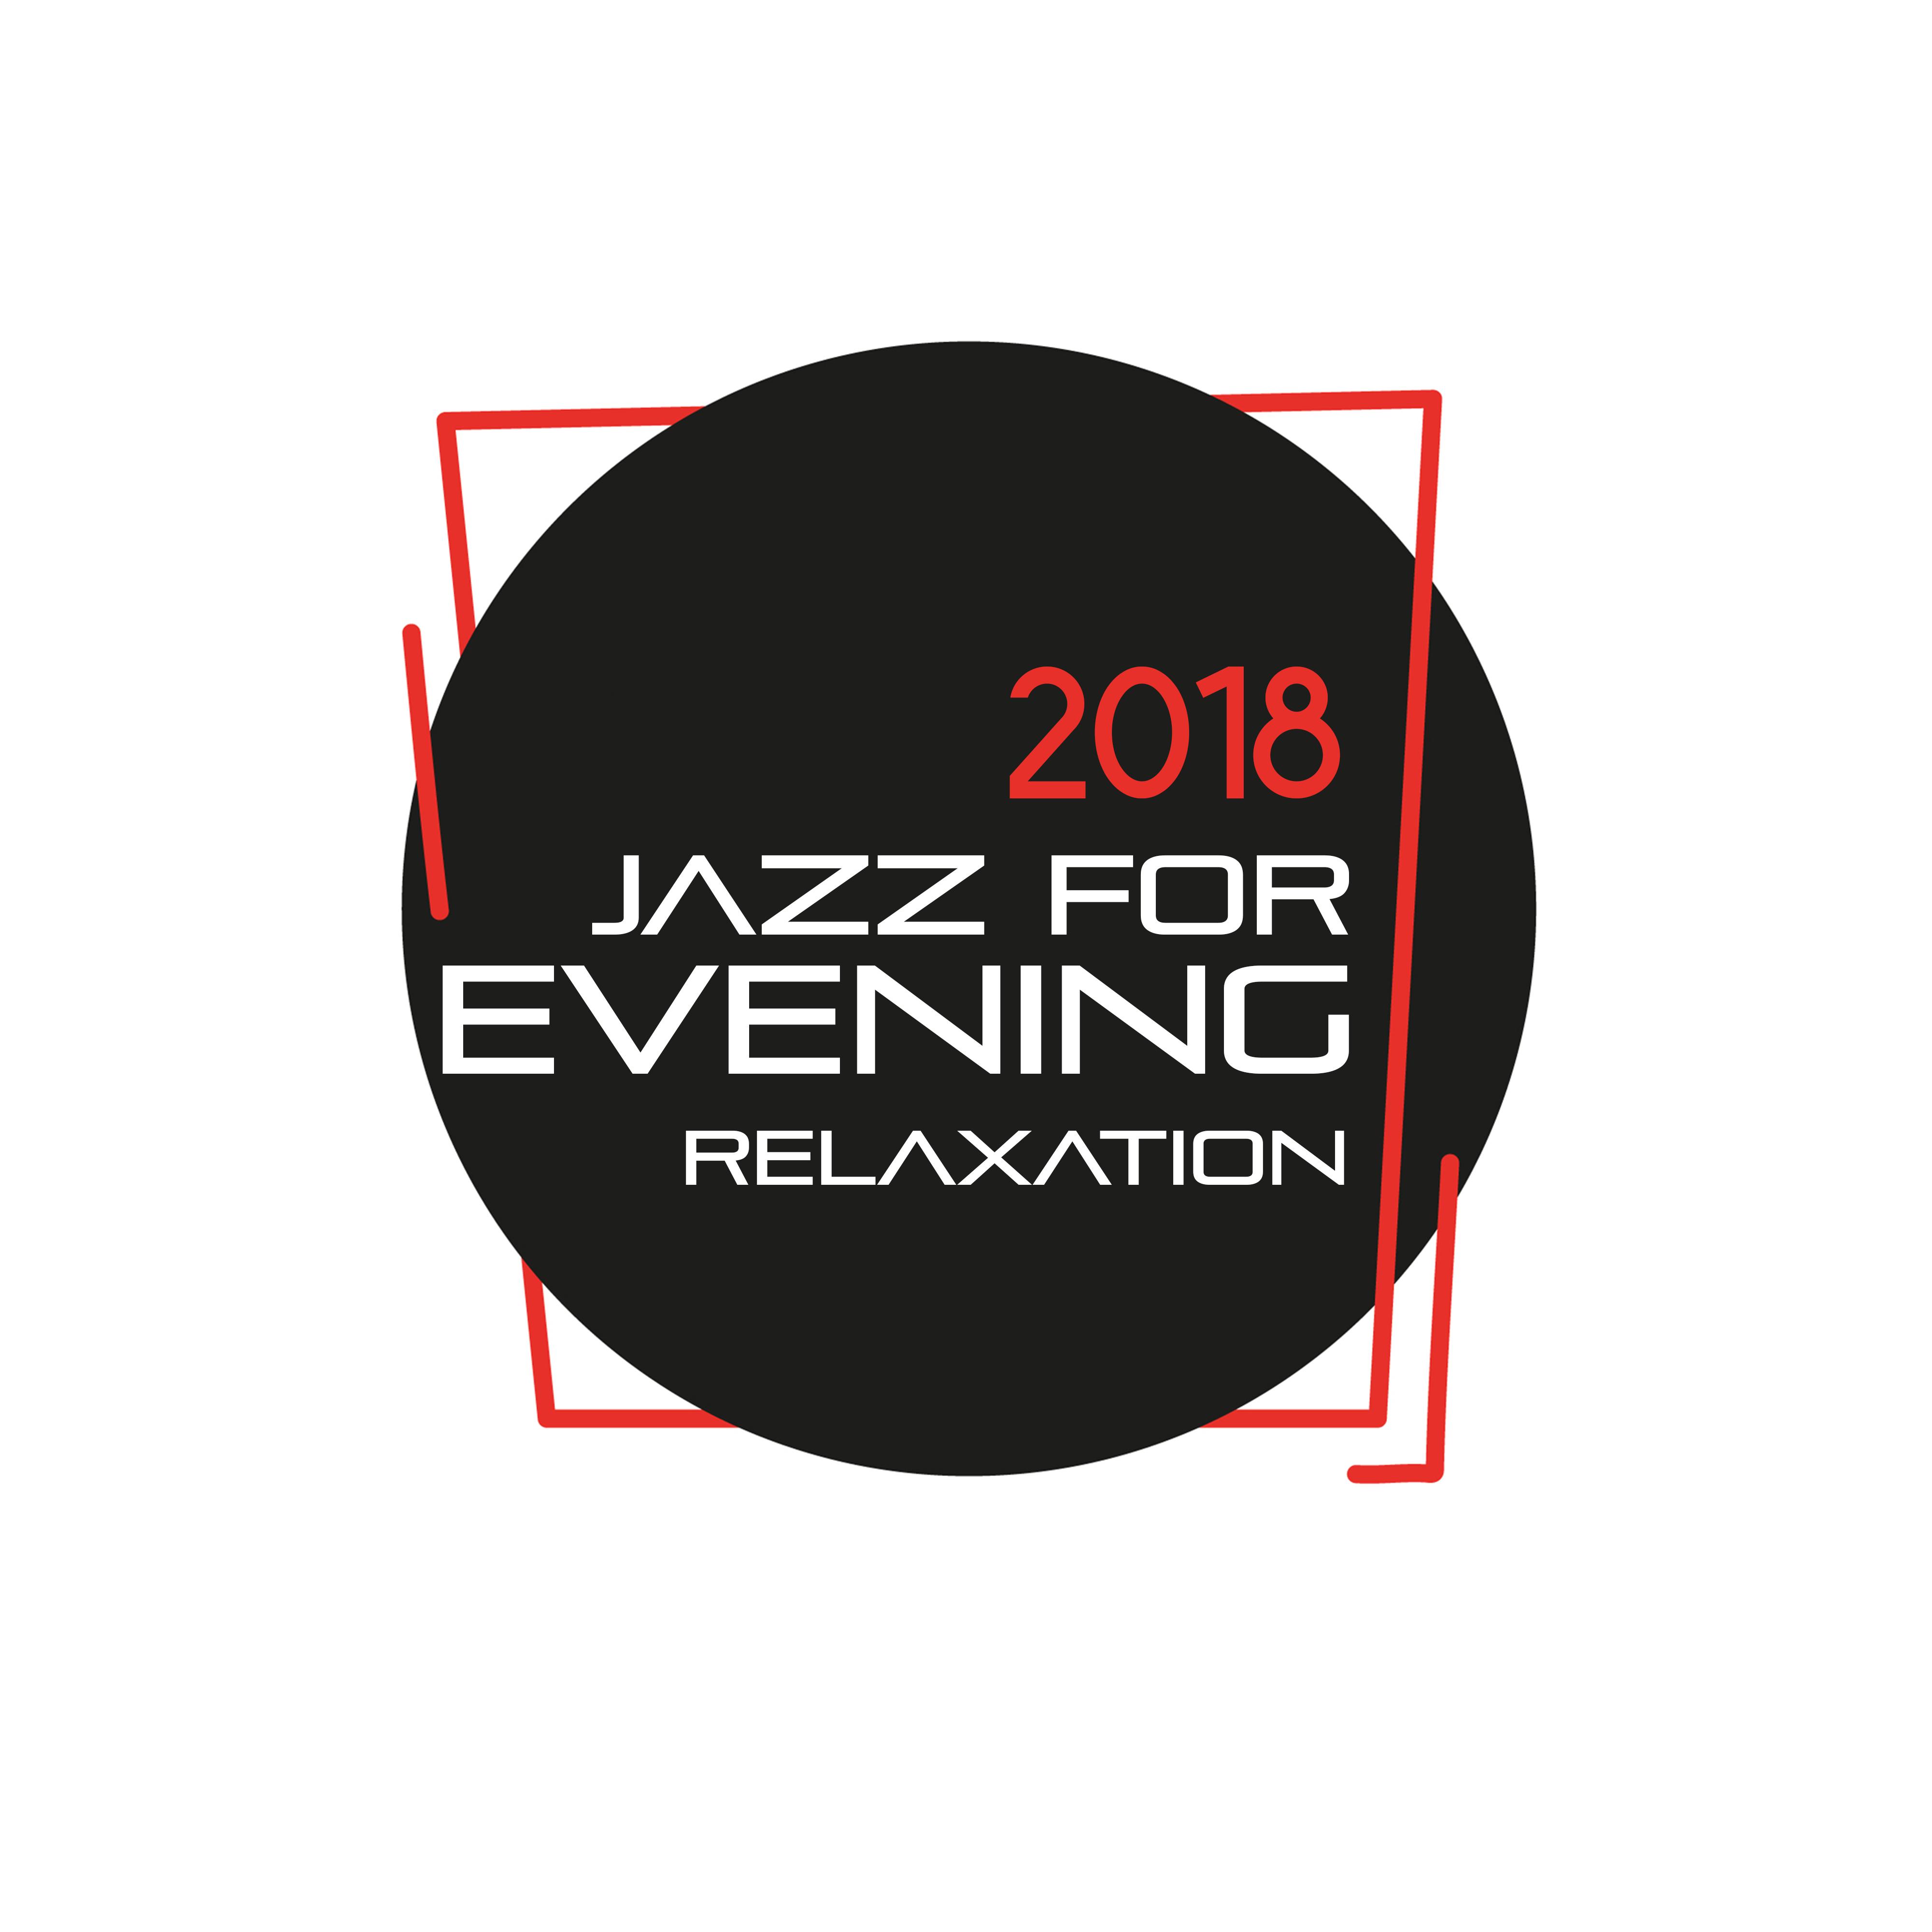 Jazz for Evening Relaxation 2018